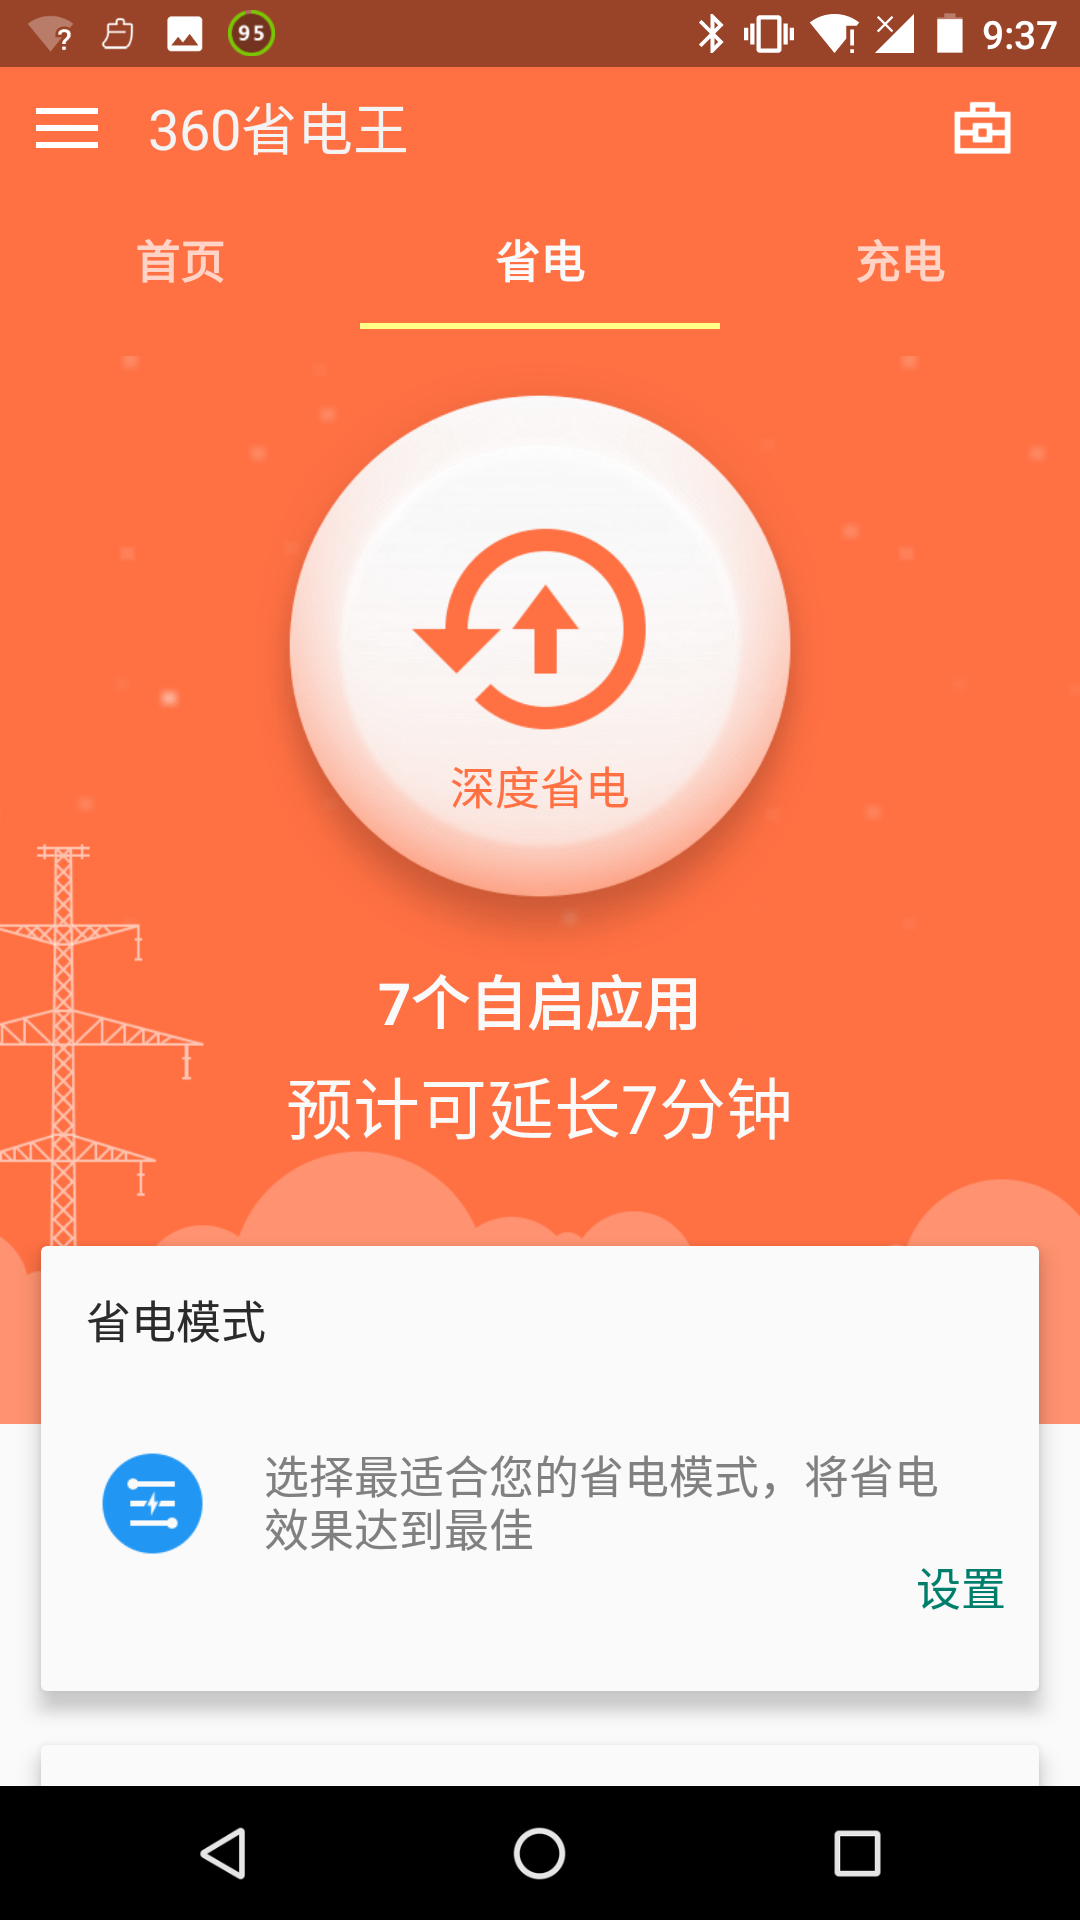 360ʡ for Android 5.16.0.180413